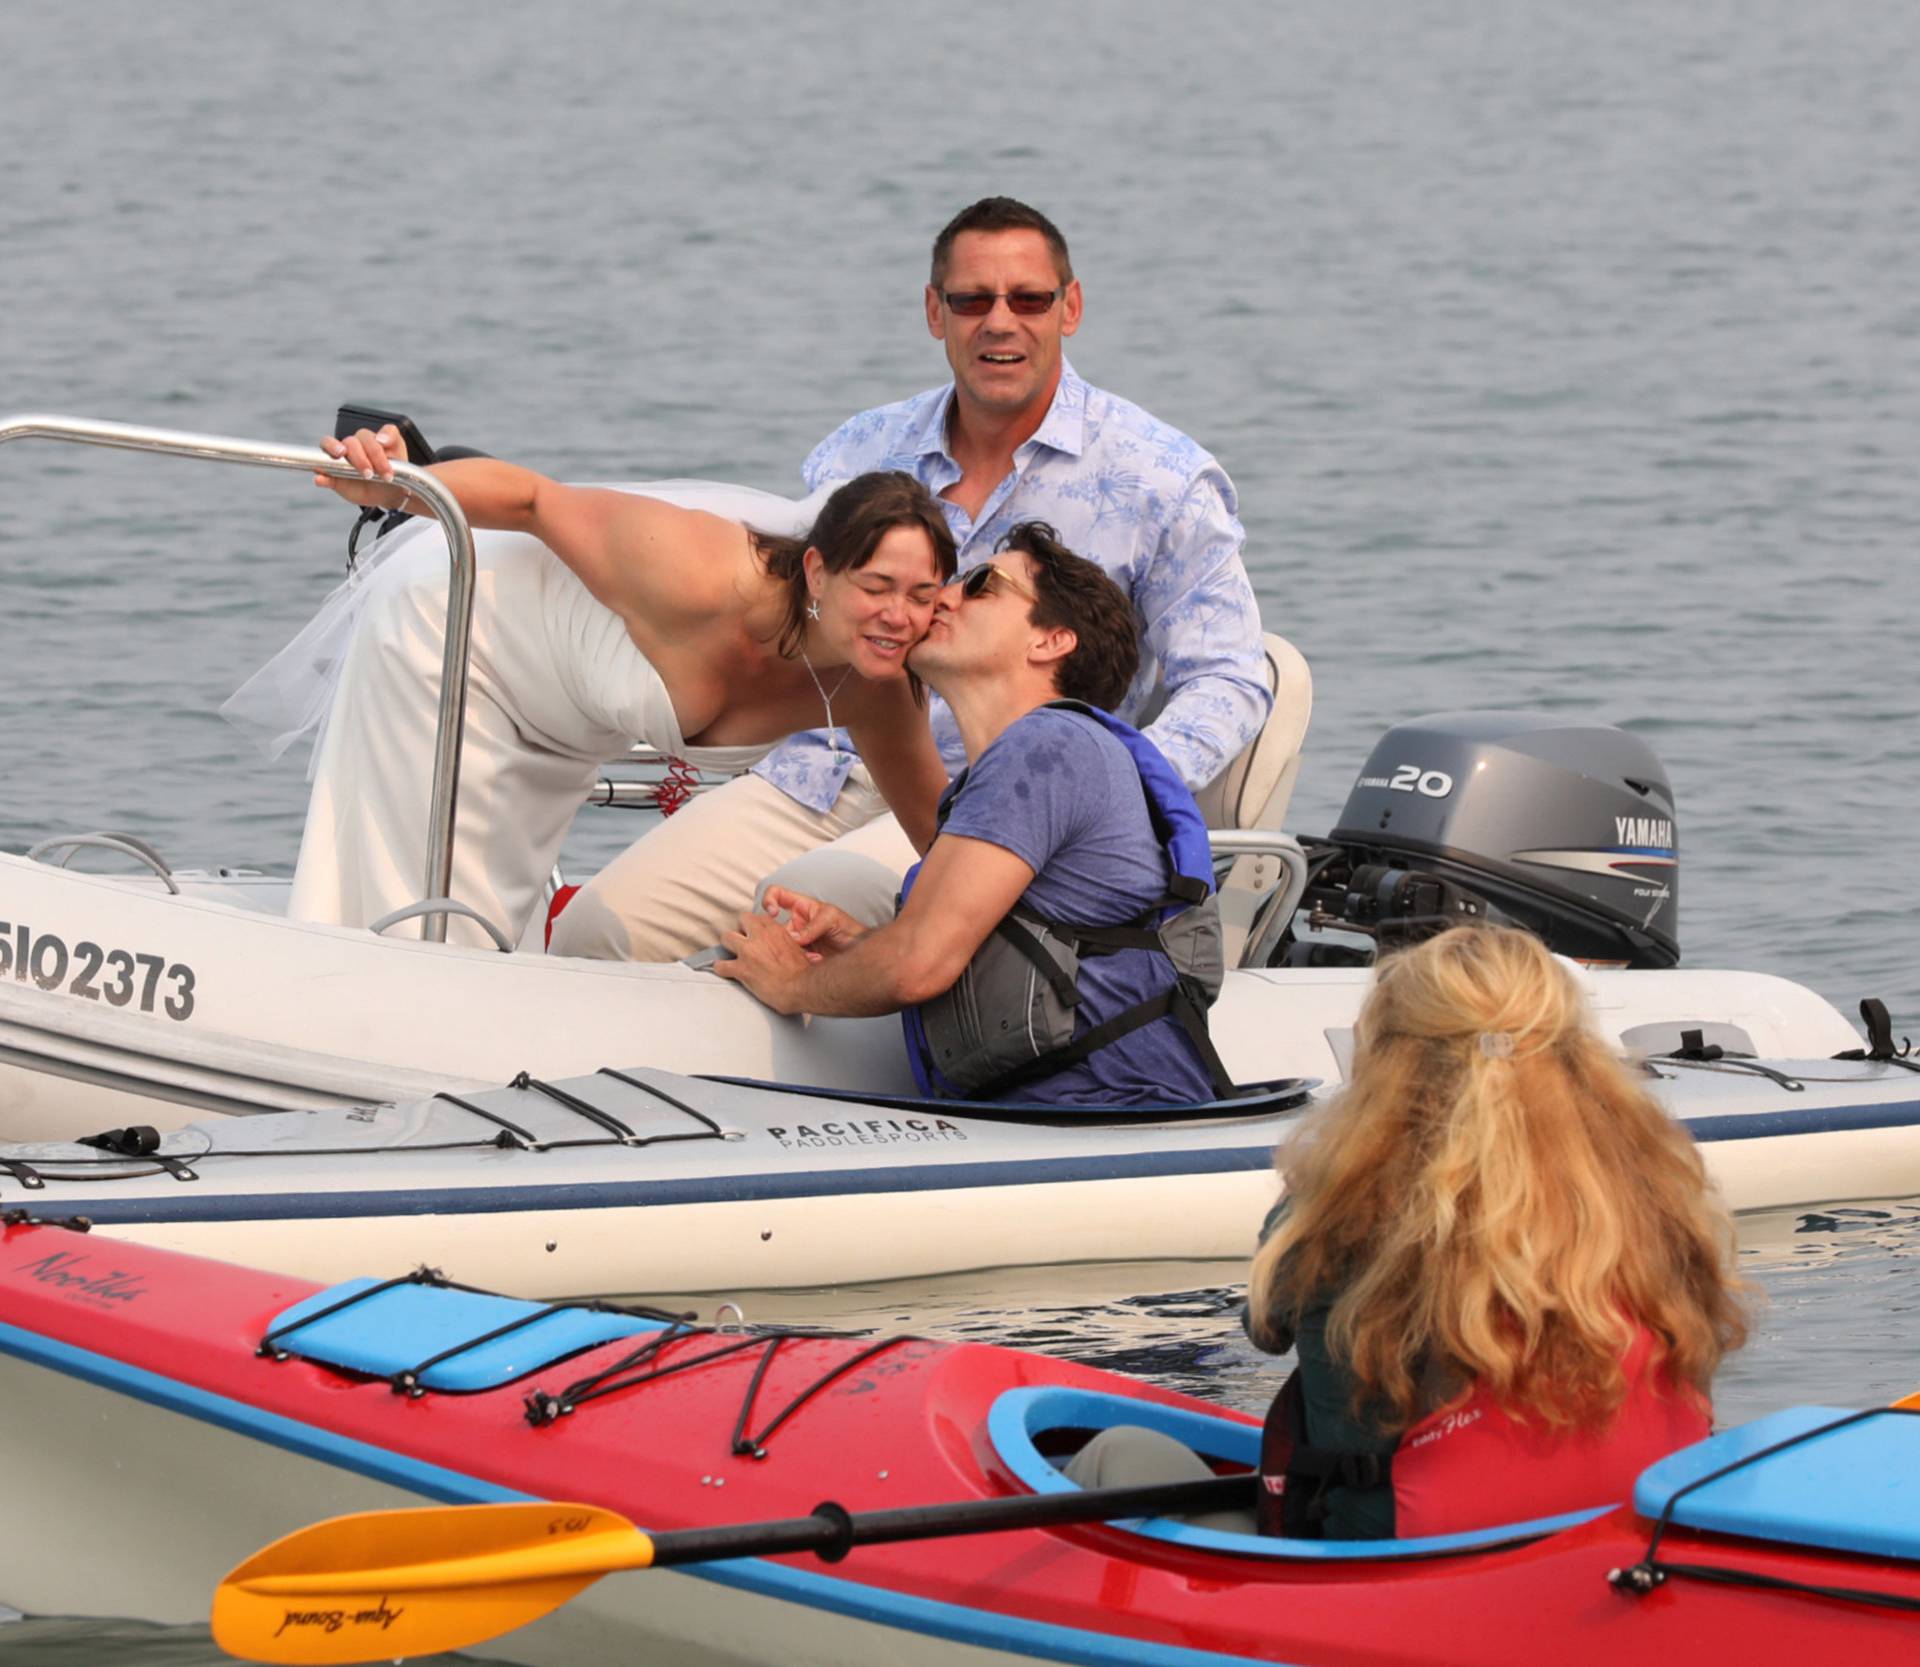 Newlyweds Michelle and Heiner Gruetzner approach Canada's Prime Minister Justin Trudeau while he was kayaking off Sidney